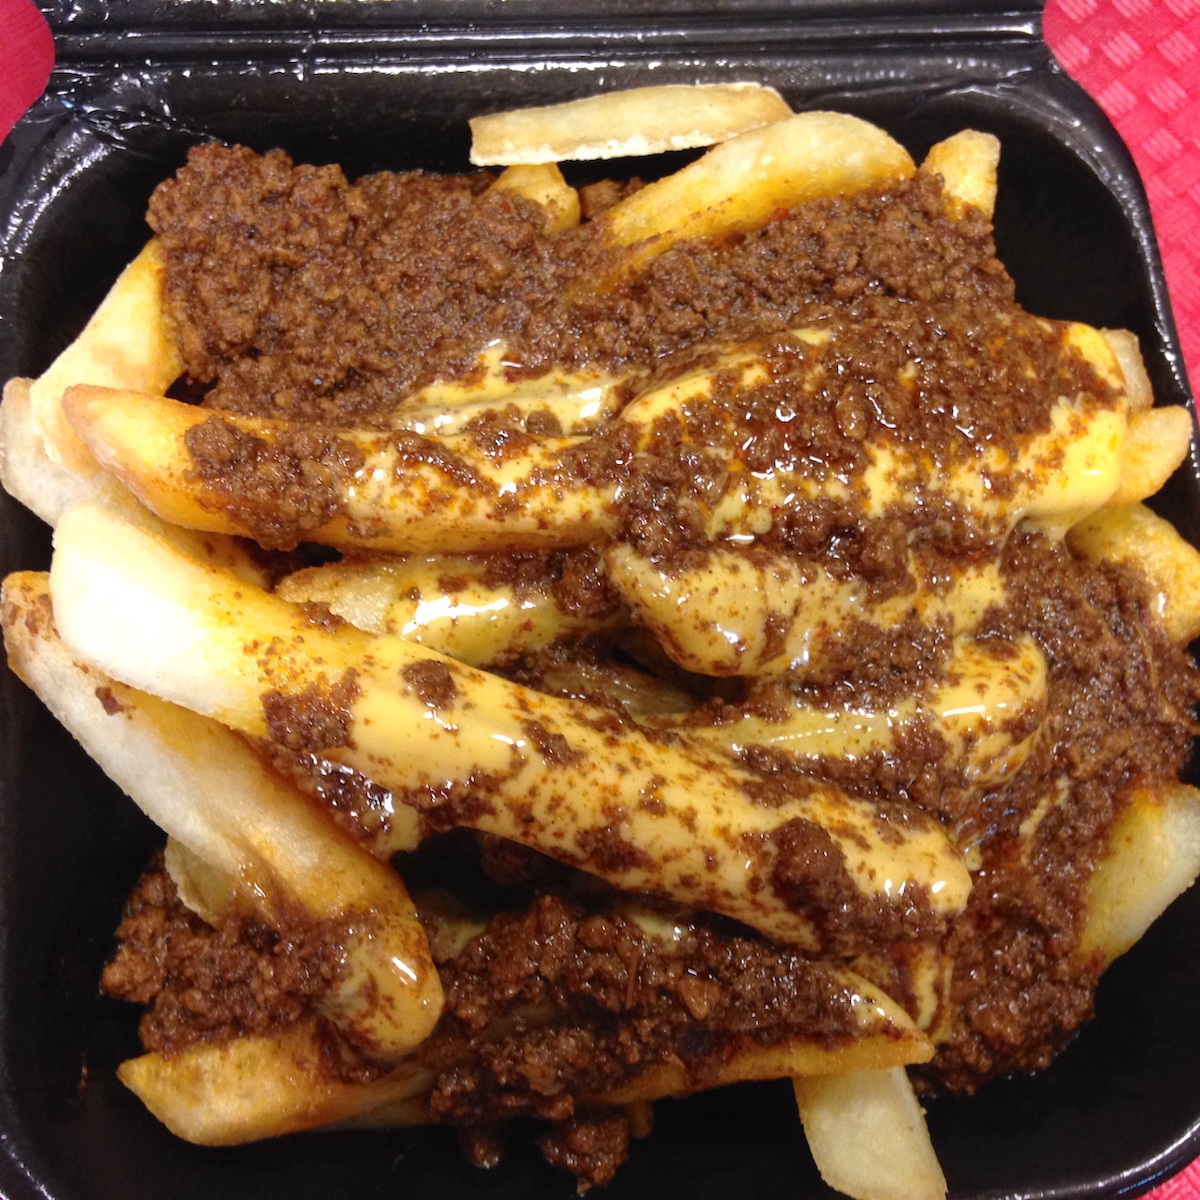 Chili Cheese Fries from Nu-Way Weiners in Macon, Georgia